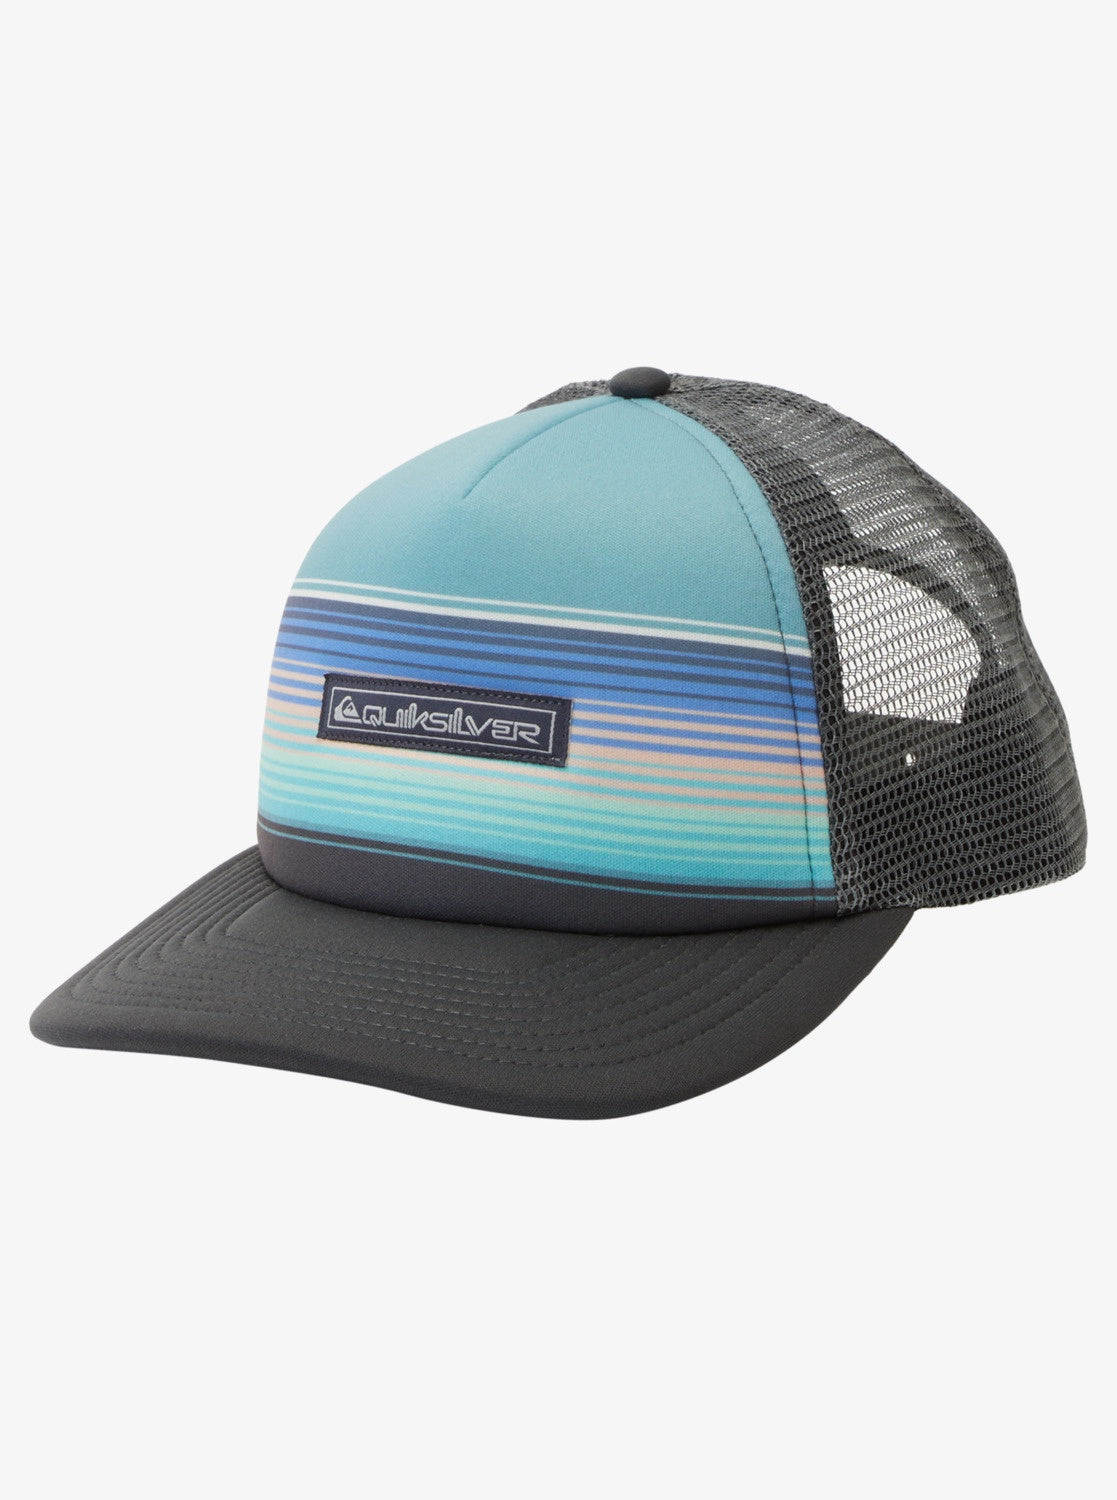 Quiksilver Hollow Tagged - Surf Shop \